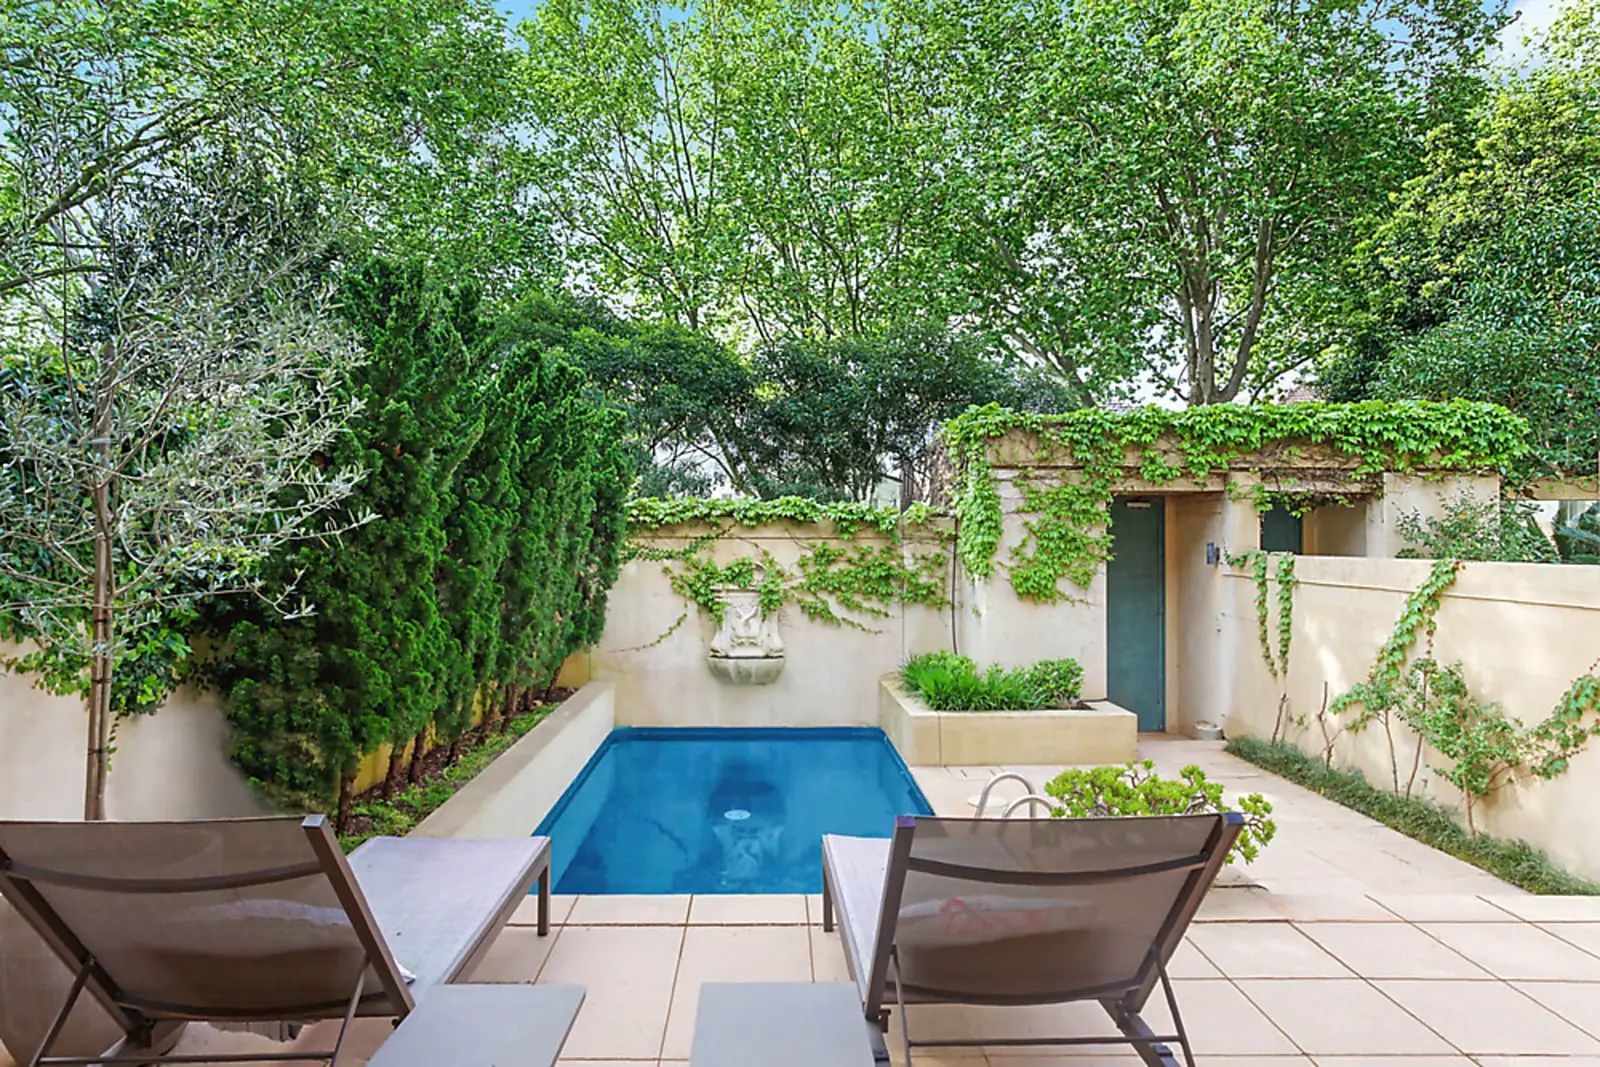 Photo #2: 63 View Street, Woollahra - Sold by Sydney Sotheby's International Realty